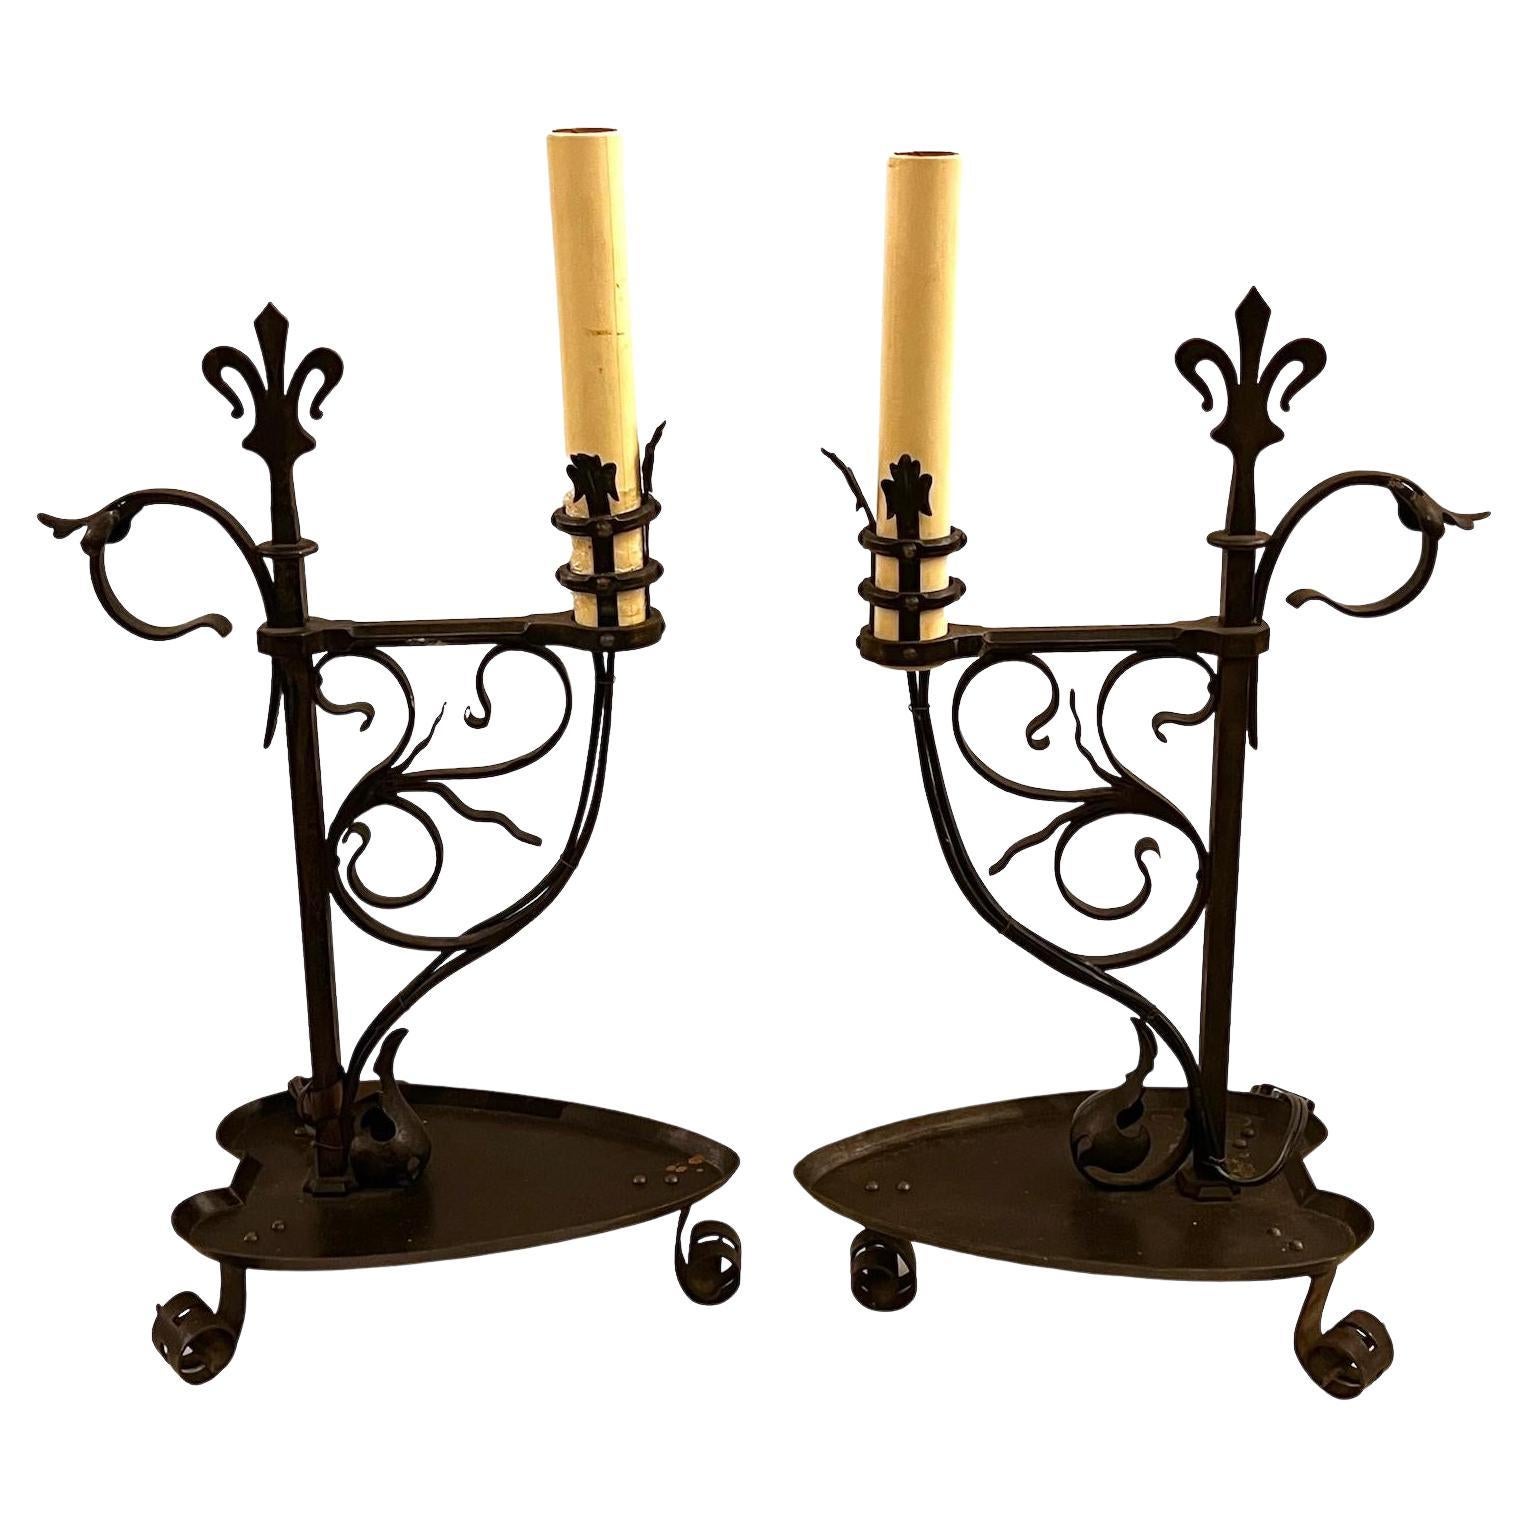 Pair of Wrought Iron Candlestick Lamps